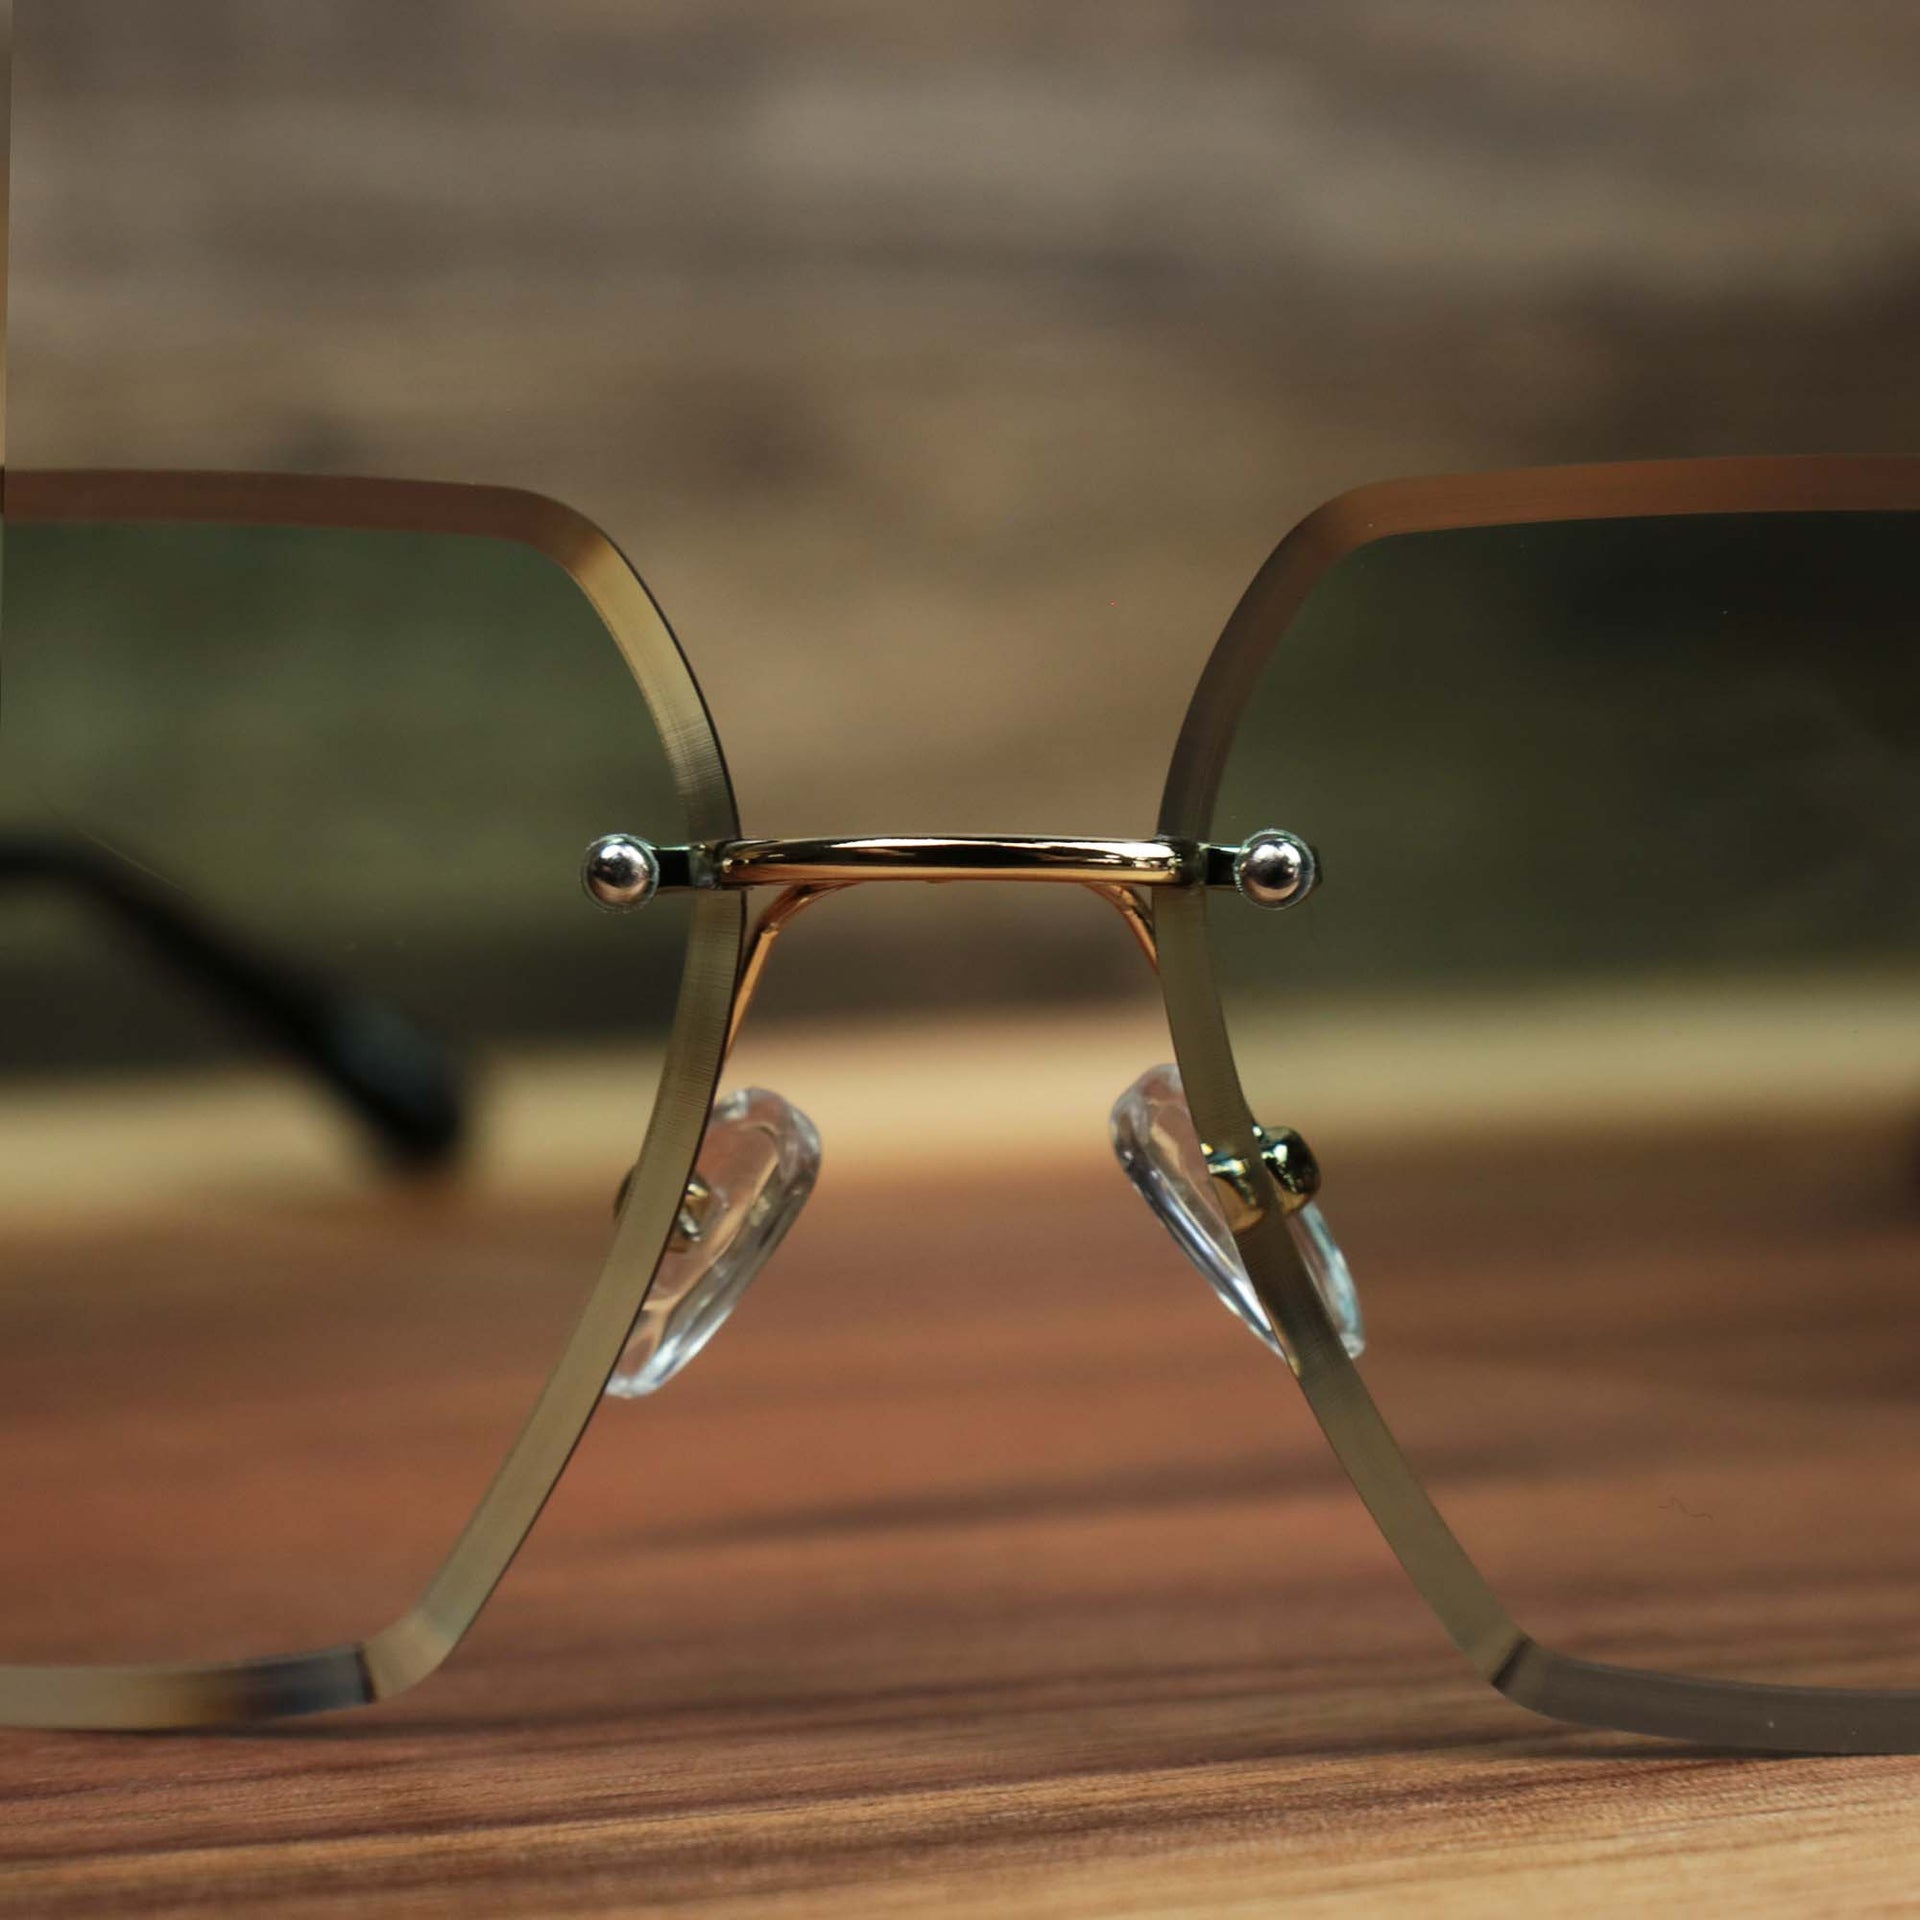 The bridge on the Large Lightweight Frame Green Lens Sunglasses with Gold Frame